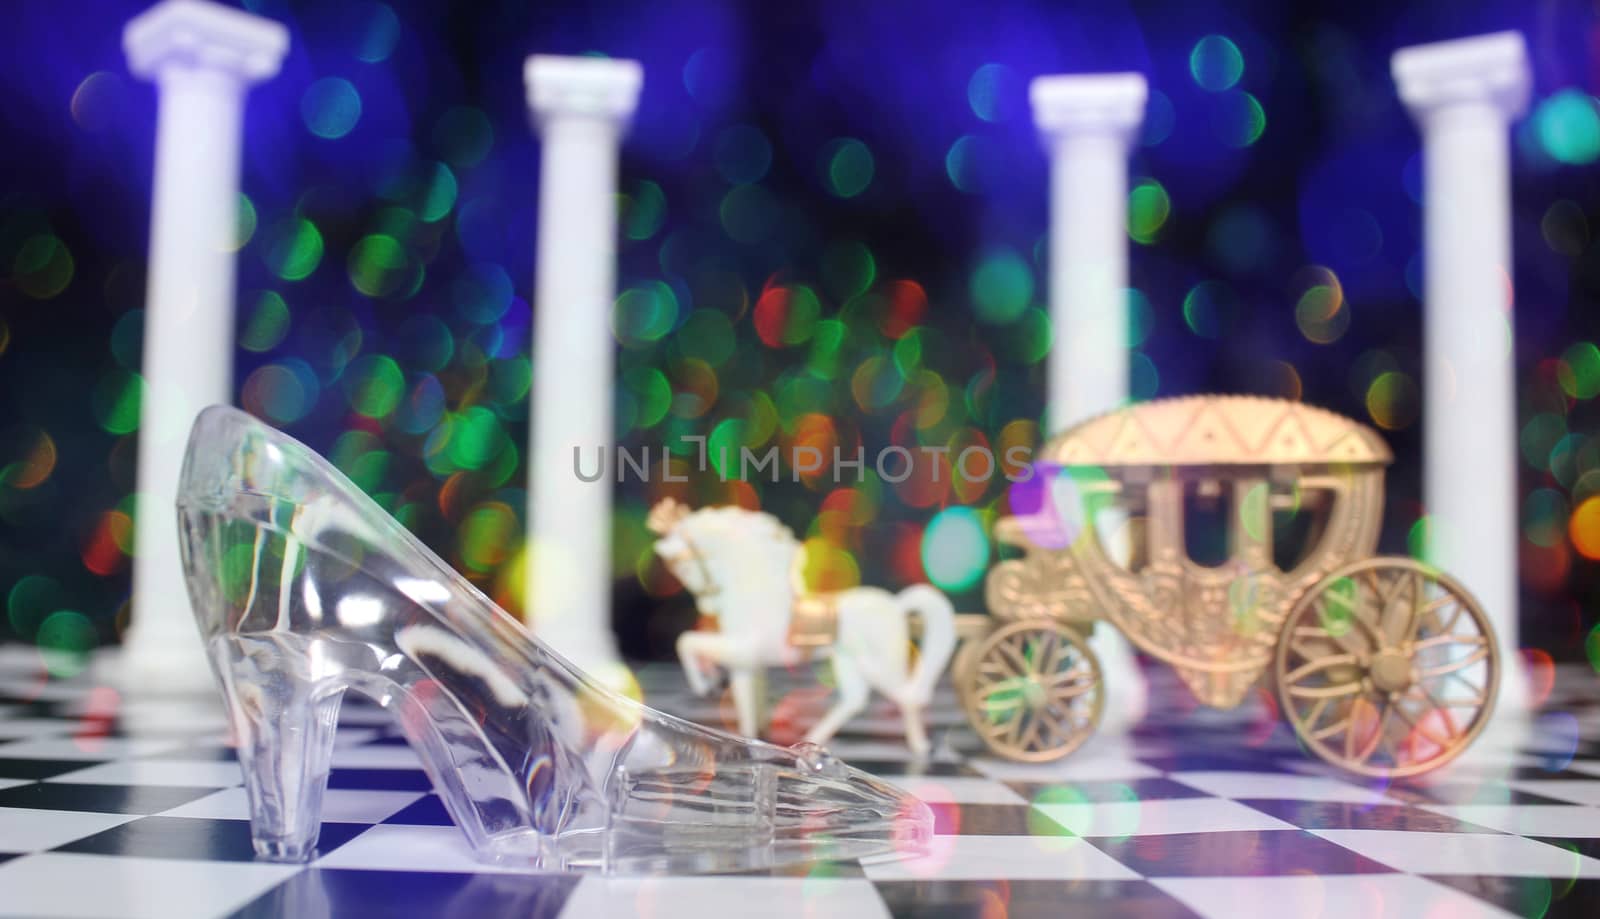 Cinderella Glass Slipper With Black and White Floor and Columns